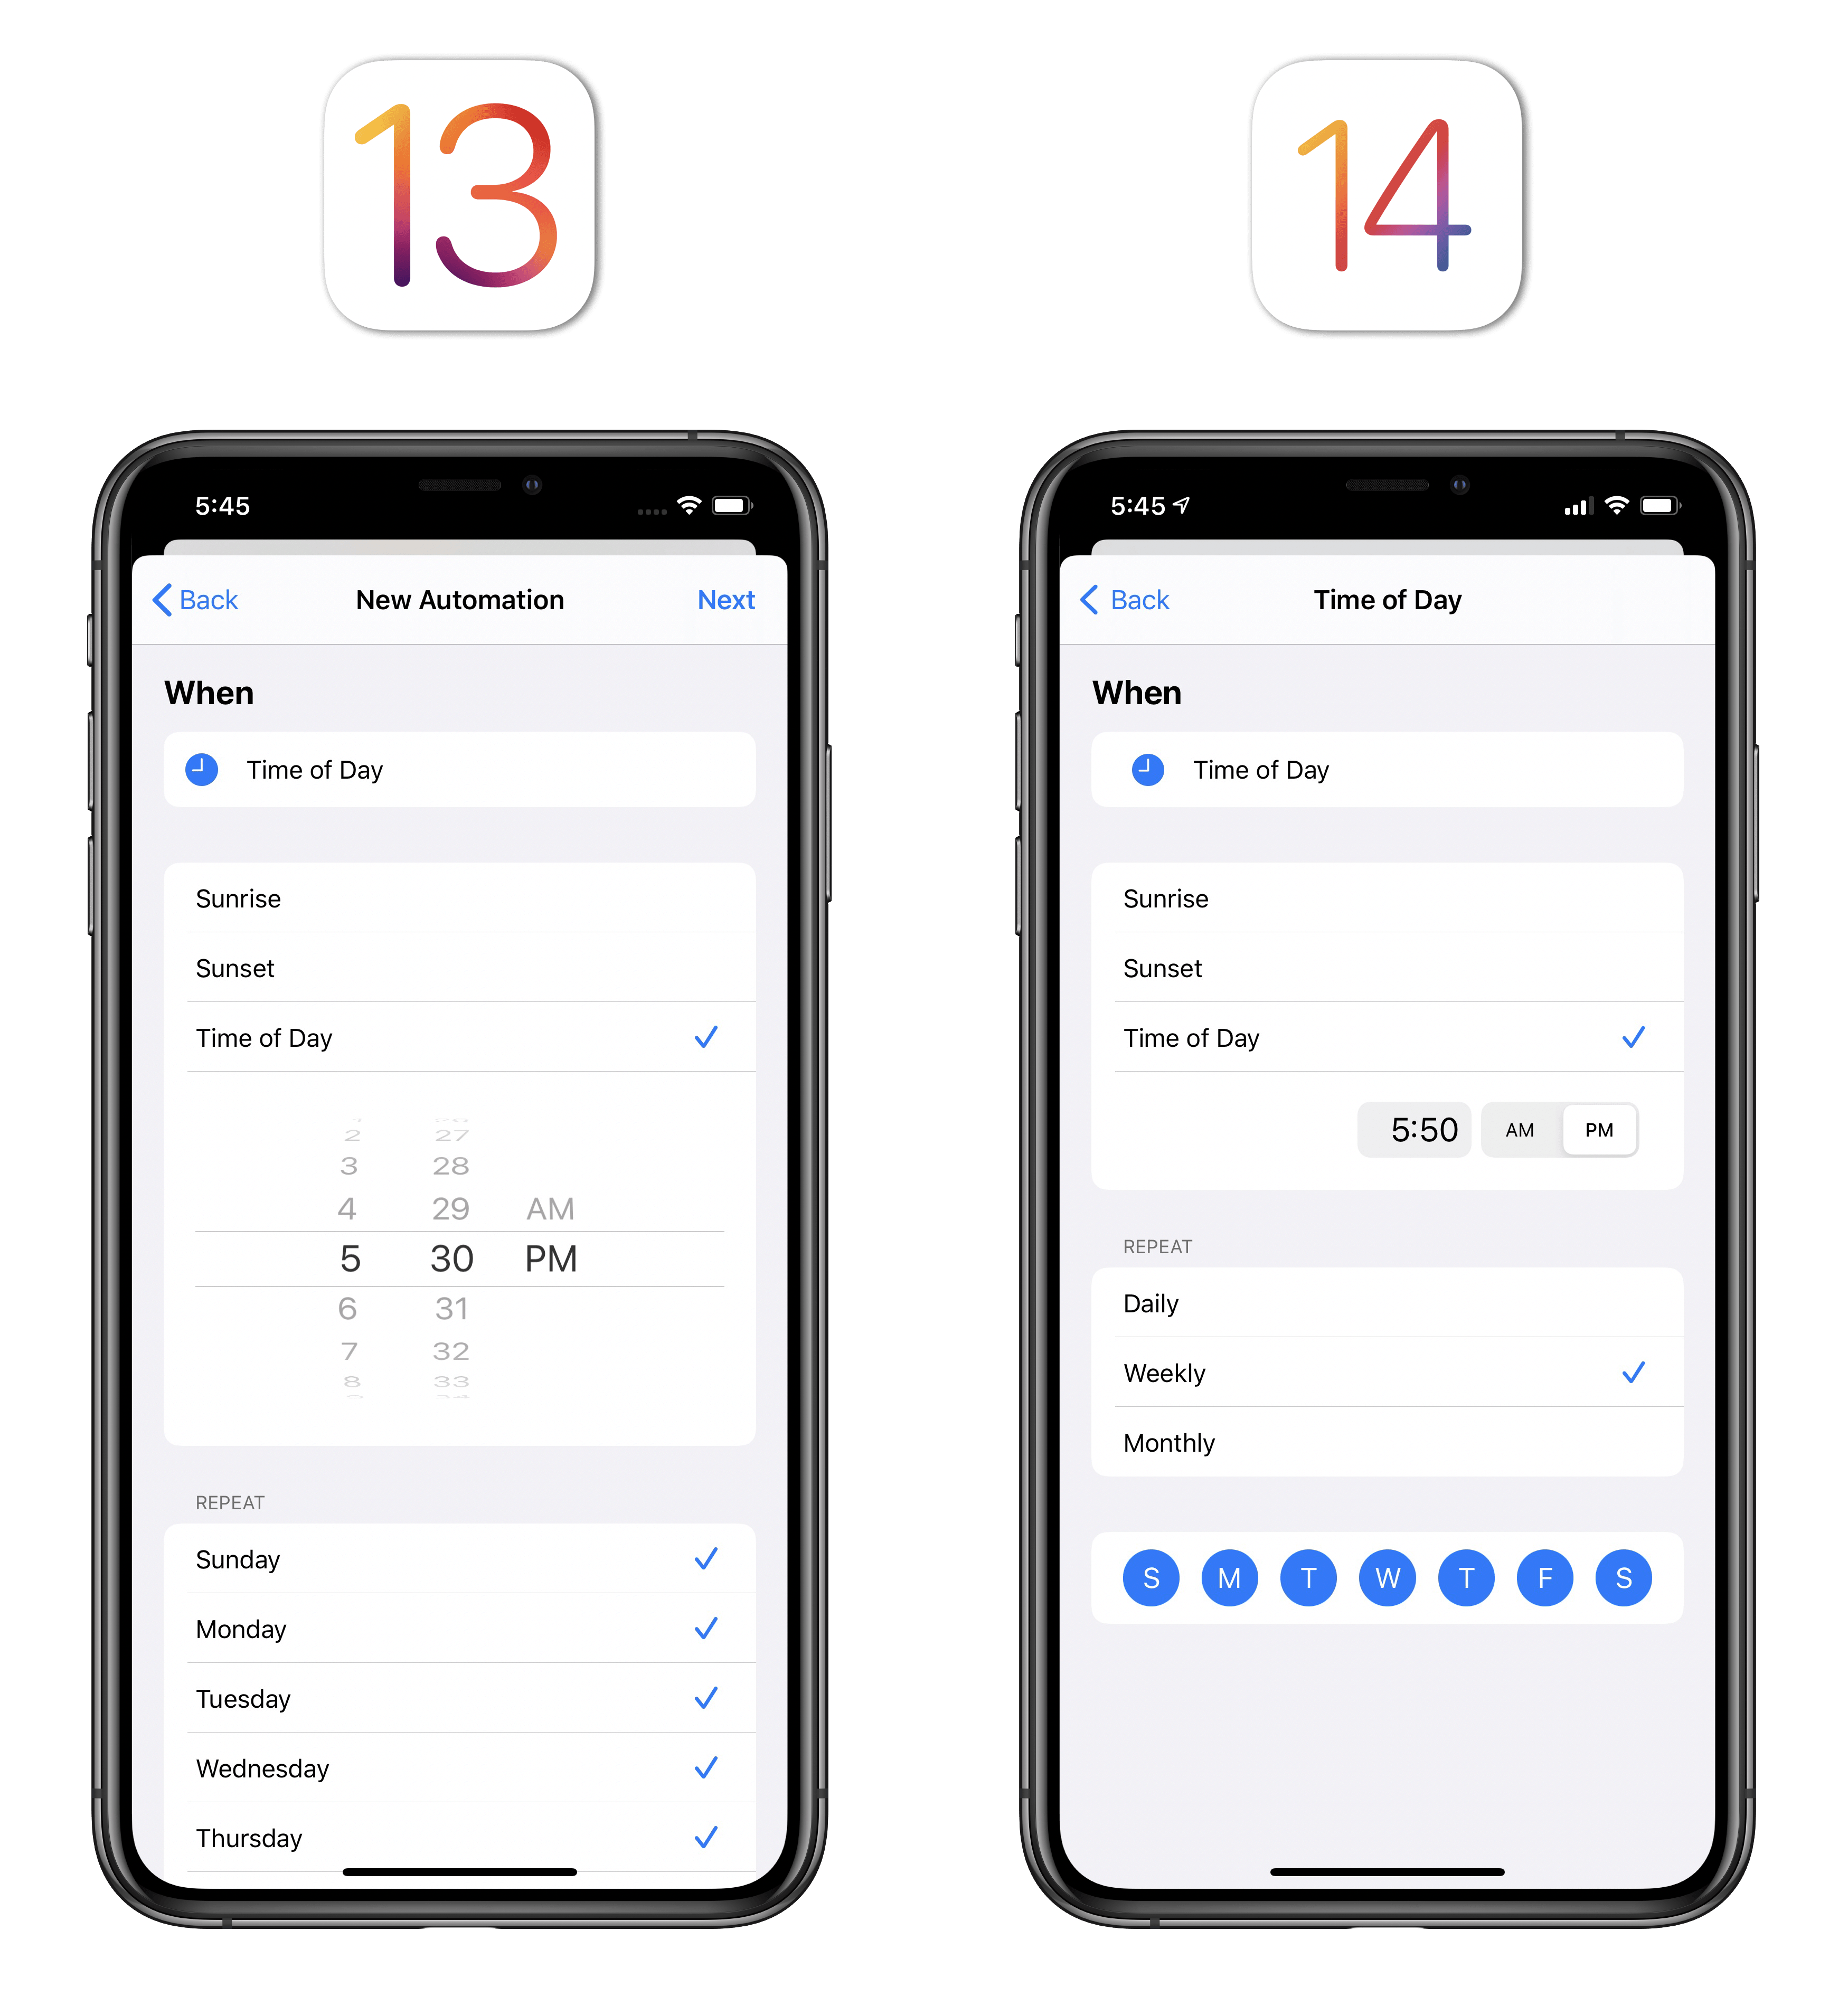 New recurrence options for scheduled automations in iOS 14.